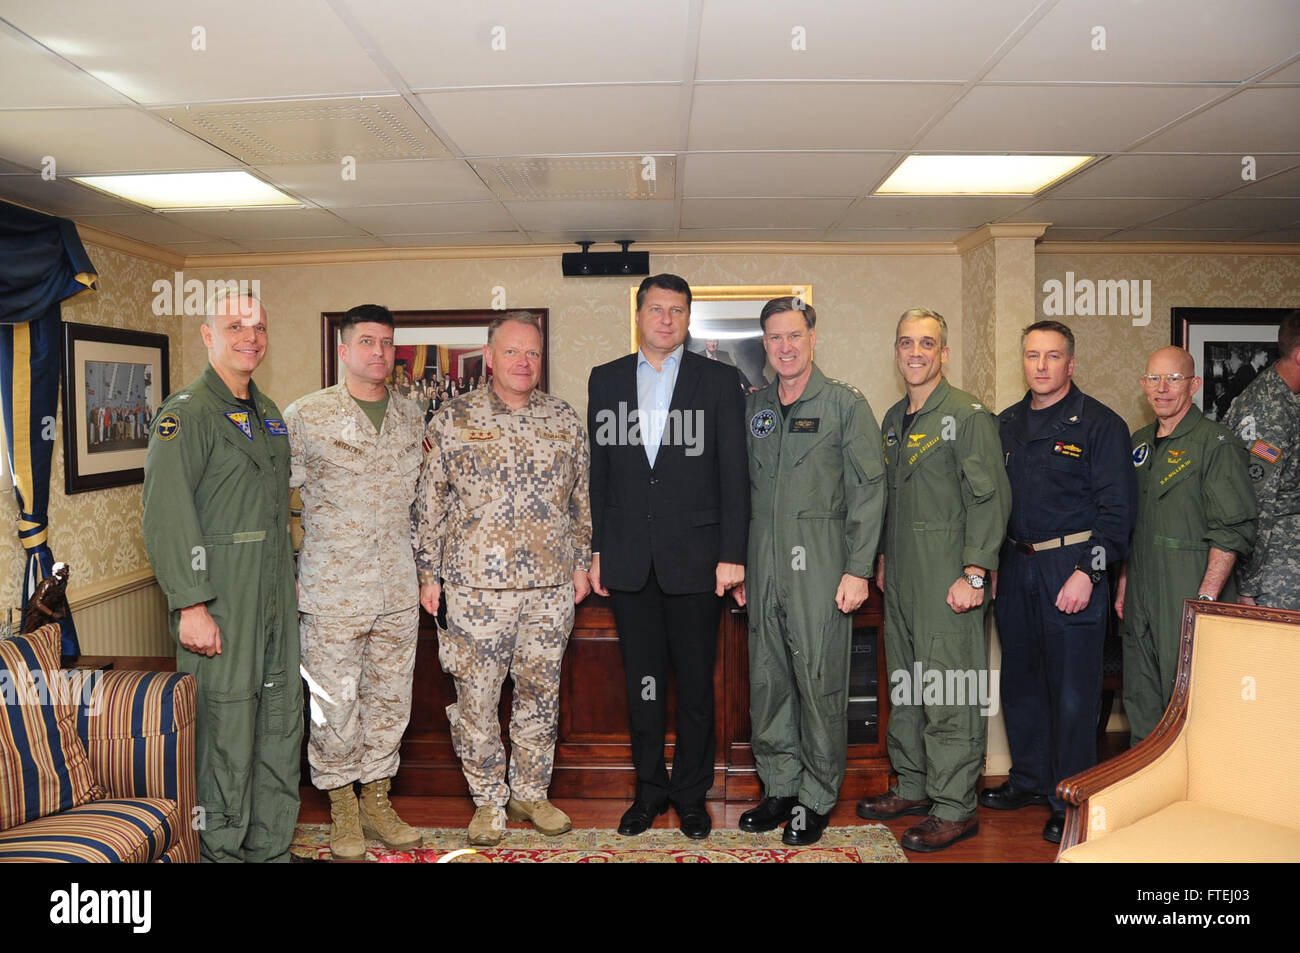 MEDITERRANEAN SEA (Oct. 30, 2014) ) From left to right, Capt. Daniel Cheever, commanding officer Carrier Airwing (CVW) 8; Lt. j.g. Raimonds Graube Latvian Chief of Defense; Lt. Cmdr. Philip Antekeir (US); Raimonds Vejonis, Latvian Chief of Defense; Adm. Mark Ferguson, commander of U.S. Naval Forces Europe-Africa, Capt. Andrew Loiselle, commanding officer USS George H.W. Bush (CVN 77); Capt. Robert Bodvake, Commodore Destroyer Squadron (DESRON) 22; and Rear Adm. DeWolfe Miller III, commander of Carrier Strike Group (CSG) 2, pose for a photo opportunity with a distinguished vi Stock Photo